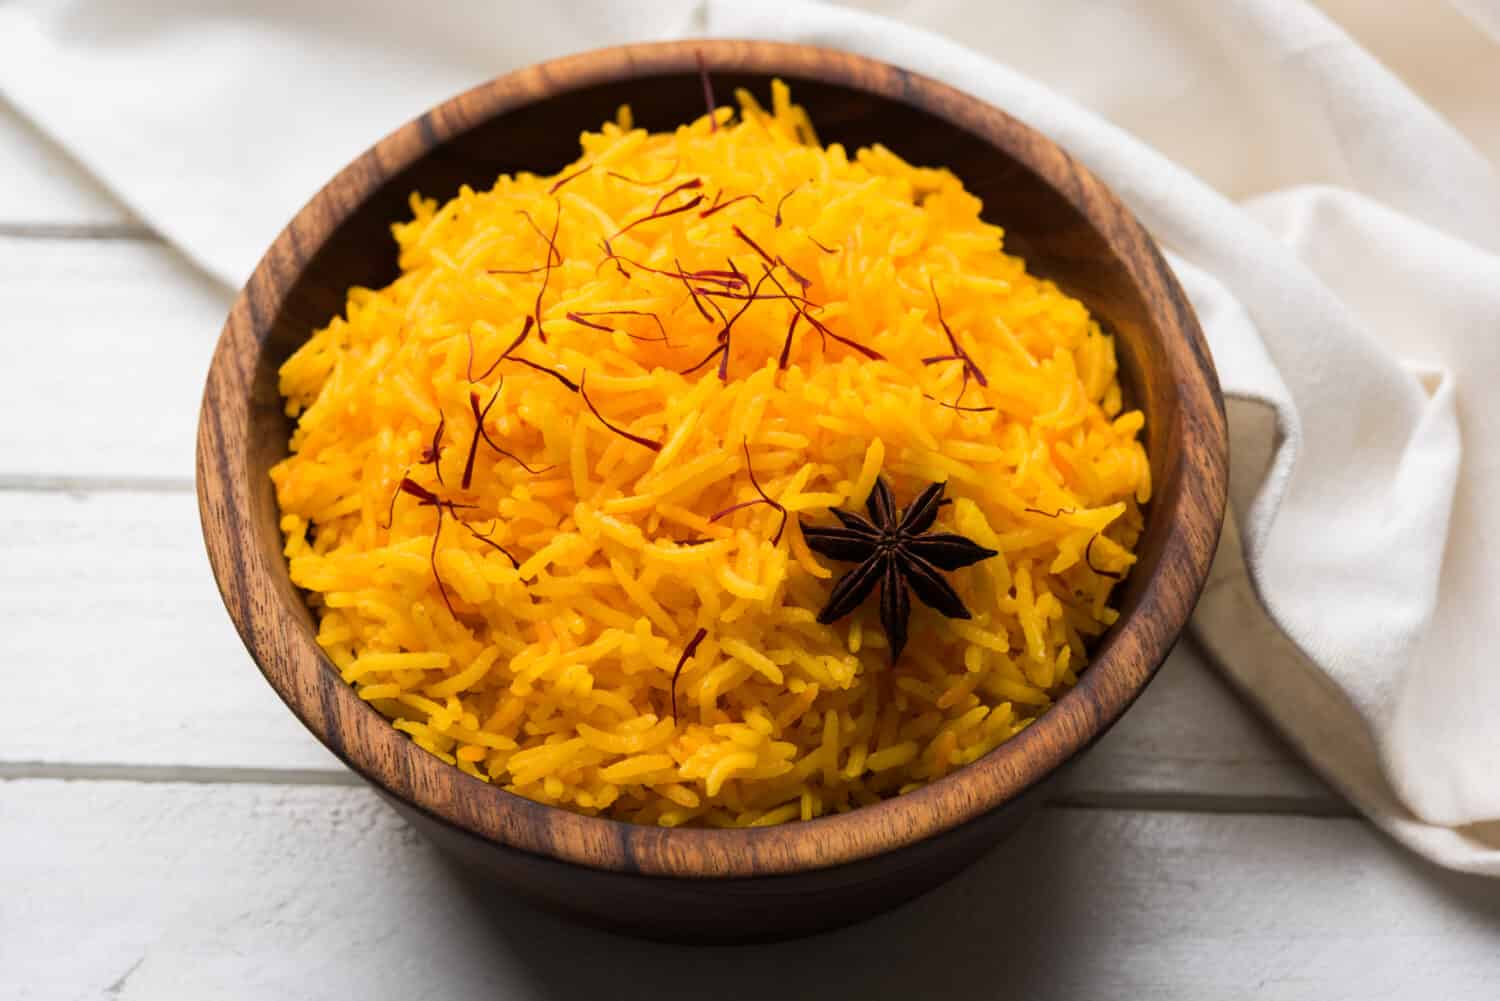 Saffron rice or Kesar chawal / bhat, served in a white ceramic bowl, selective focus